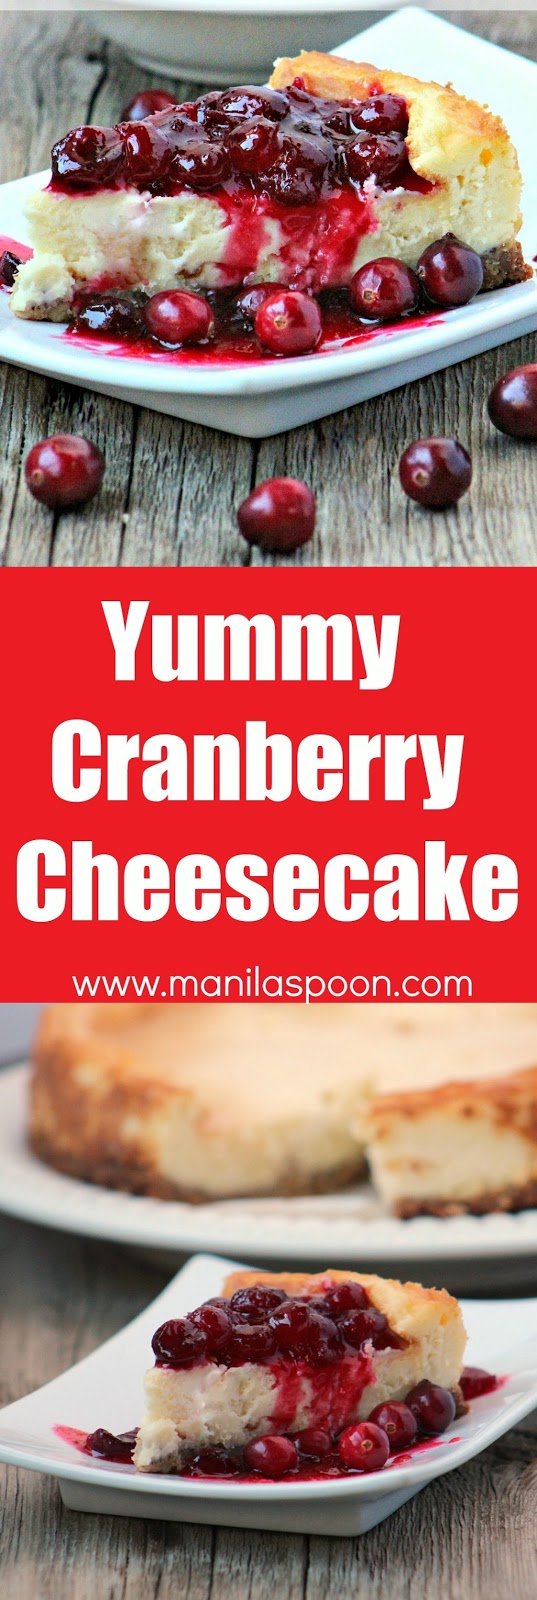 Use fresh or frozen cranberries to make this very creamy, sweet-tangy and deliciously good Yummy Cranberry Cheesecake that will make your holiday complete. Perfect for Christmas, New Year or any holiday! | manilaspoon.com